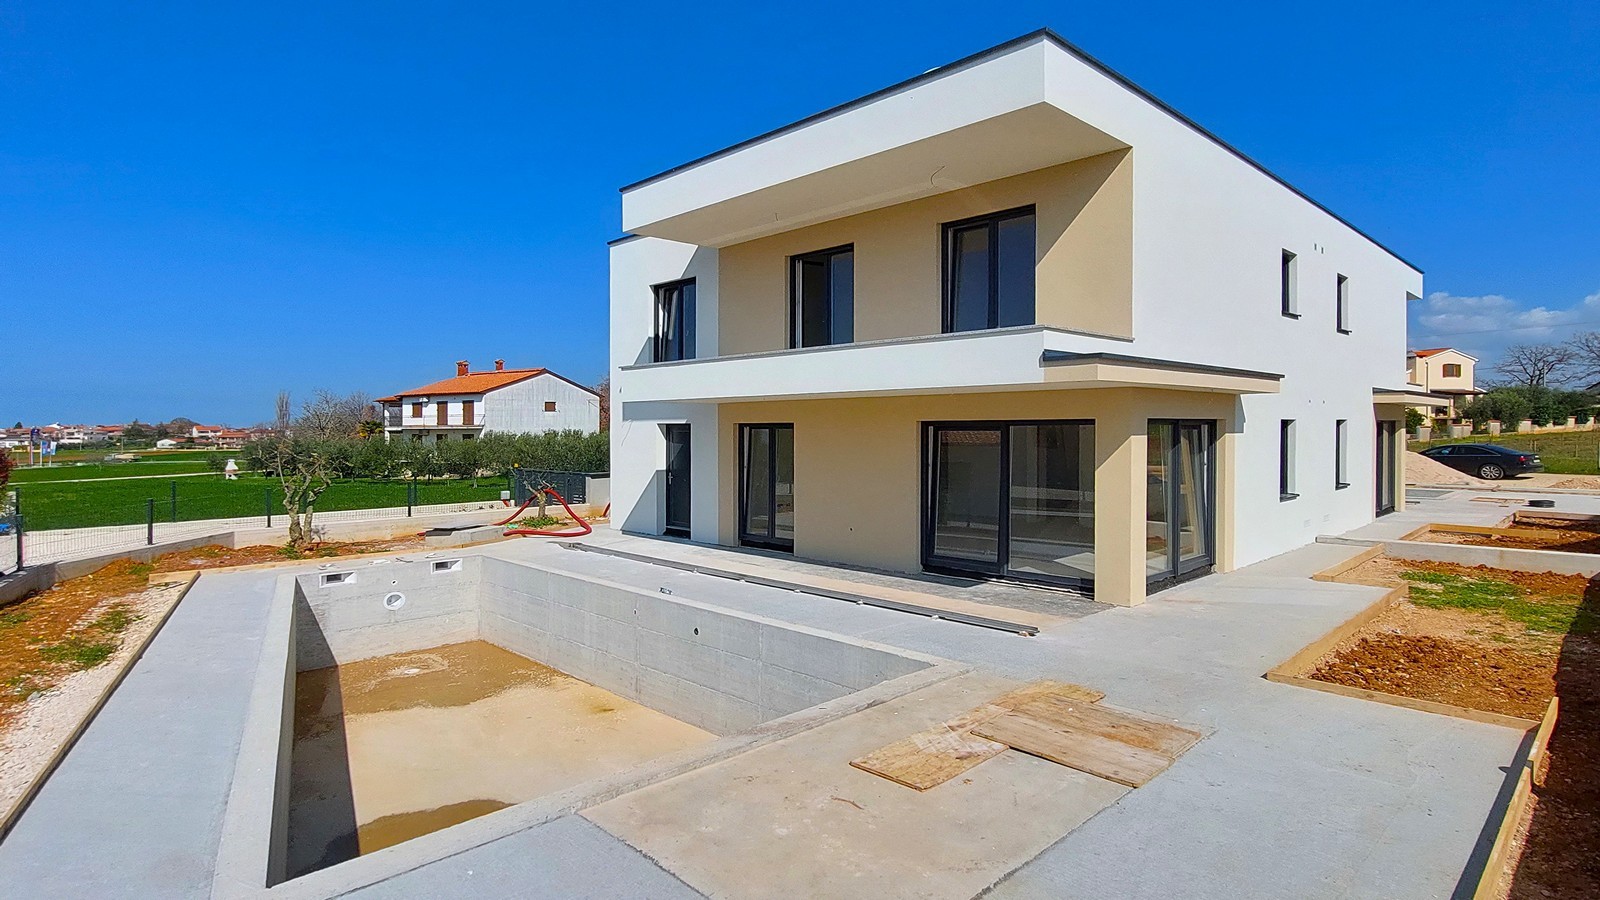 New semi-detached house with swimming pool in Poreč